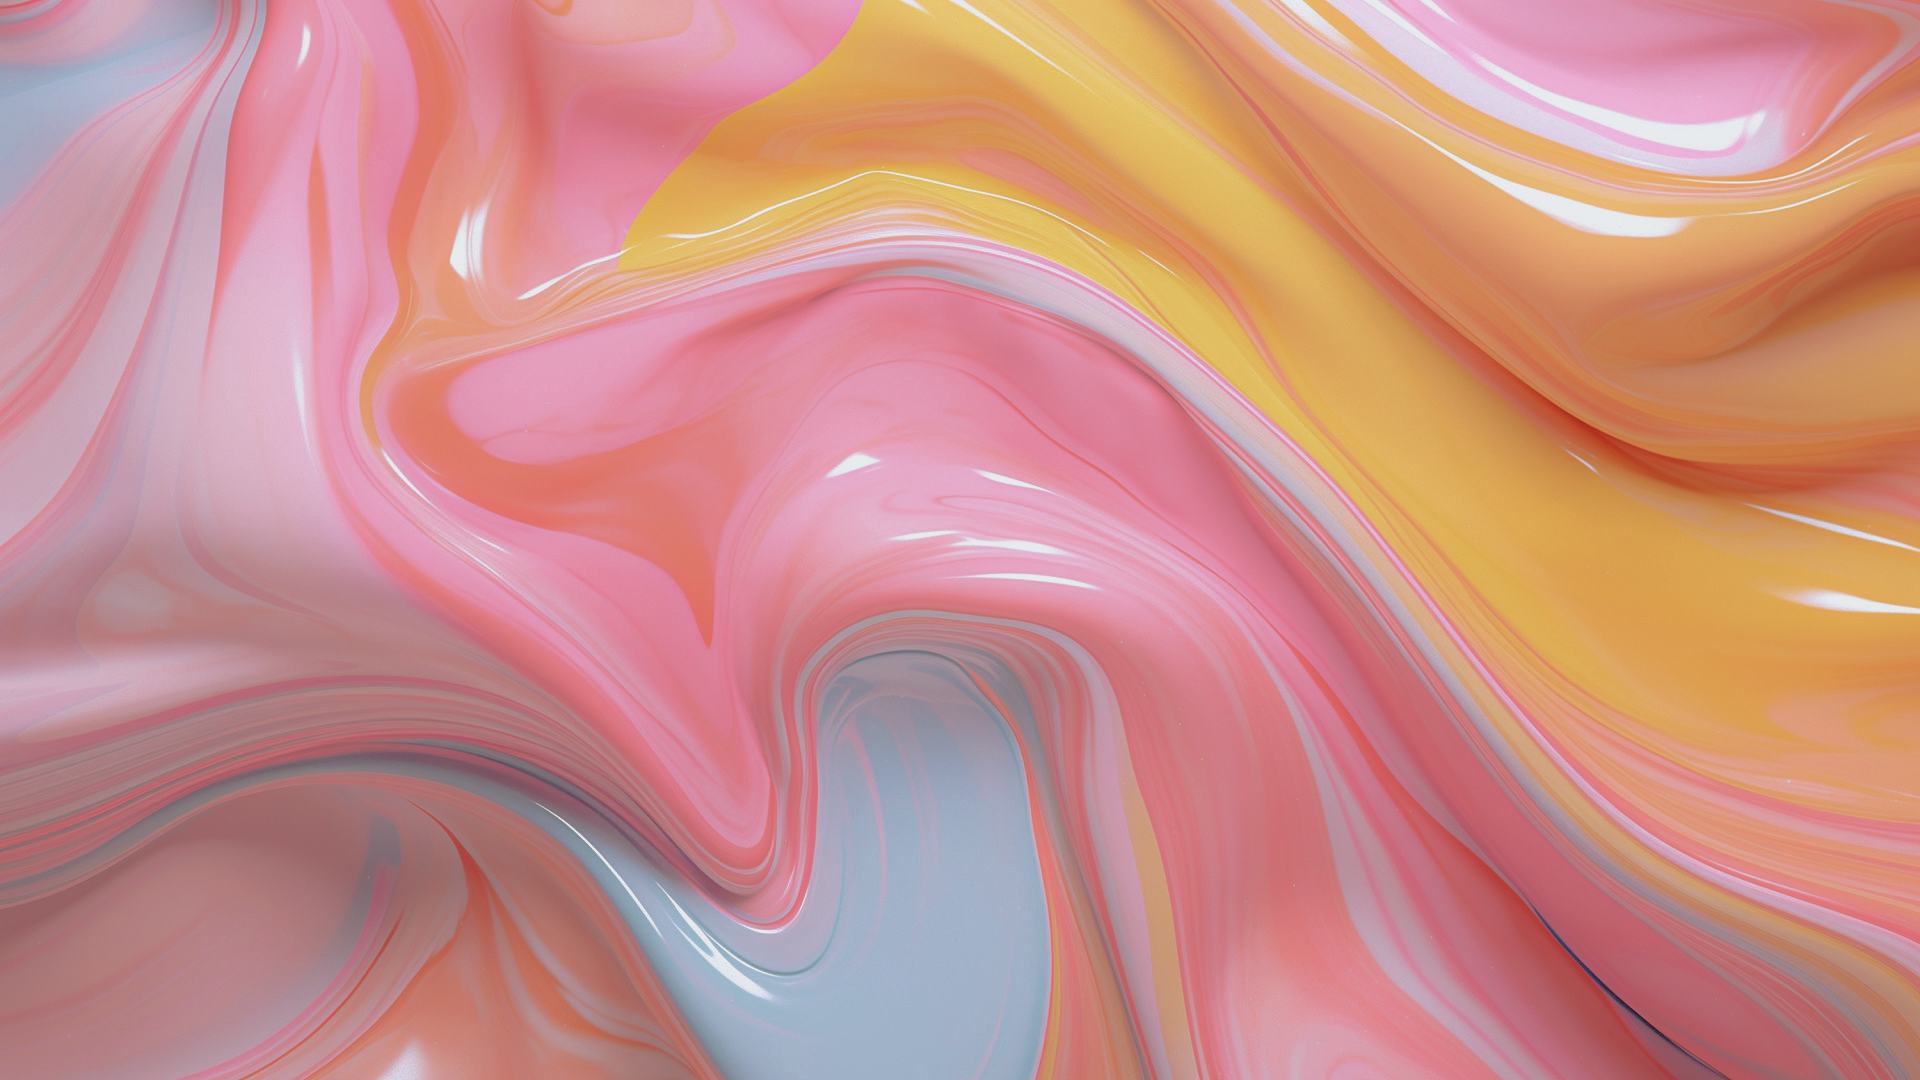 Abstract Colorful Fluid 1920x1080